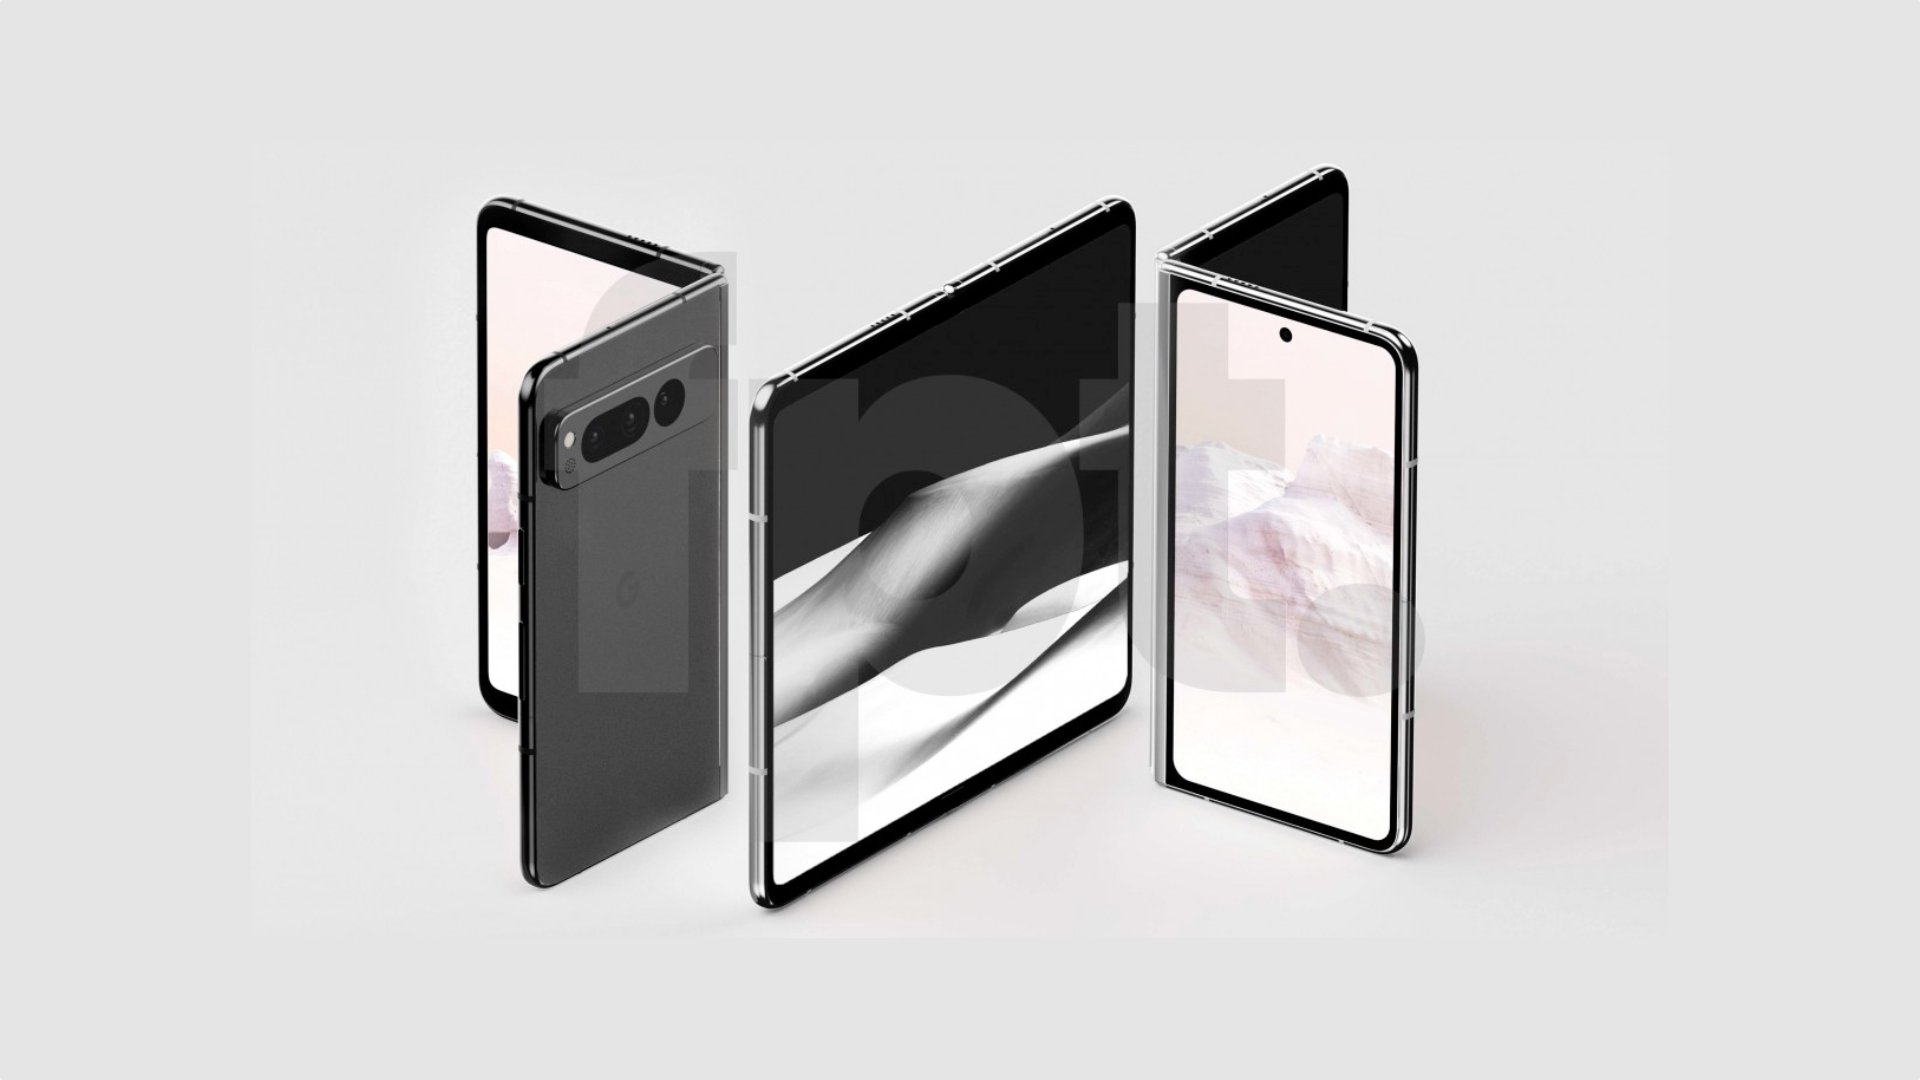 Google takes inspiration from Samsung for its first foldable phone